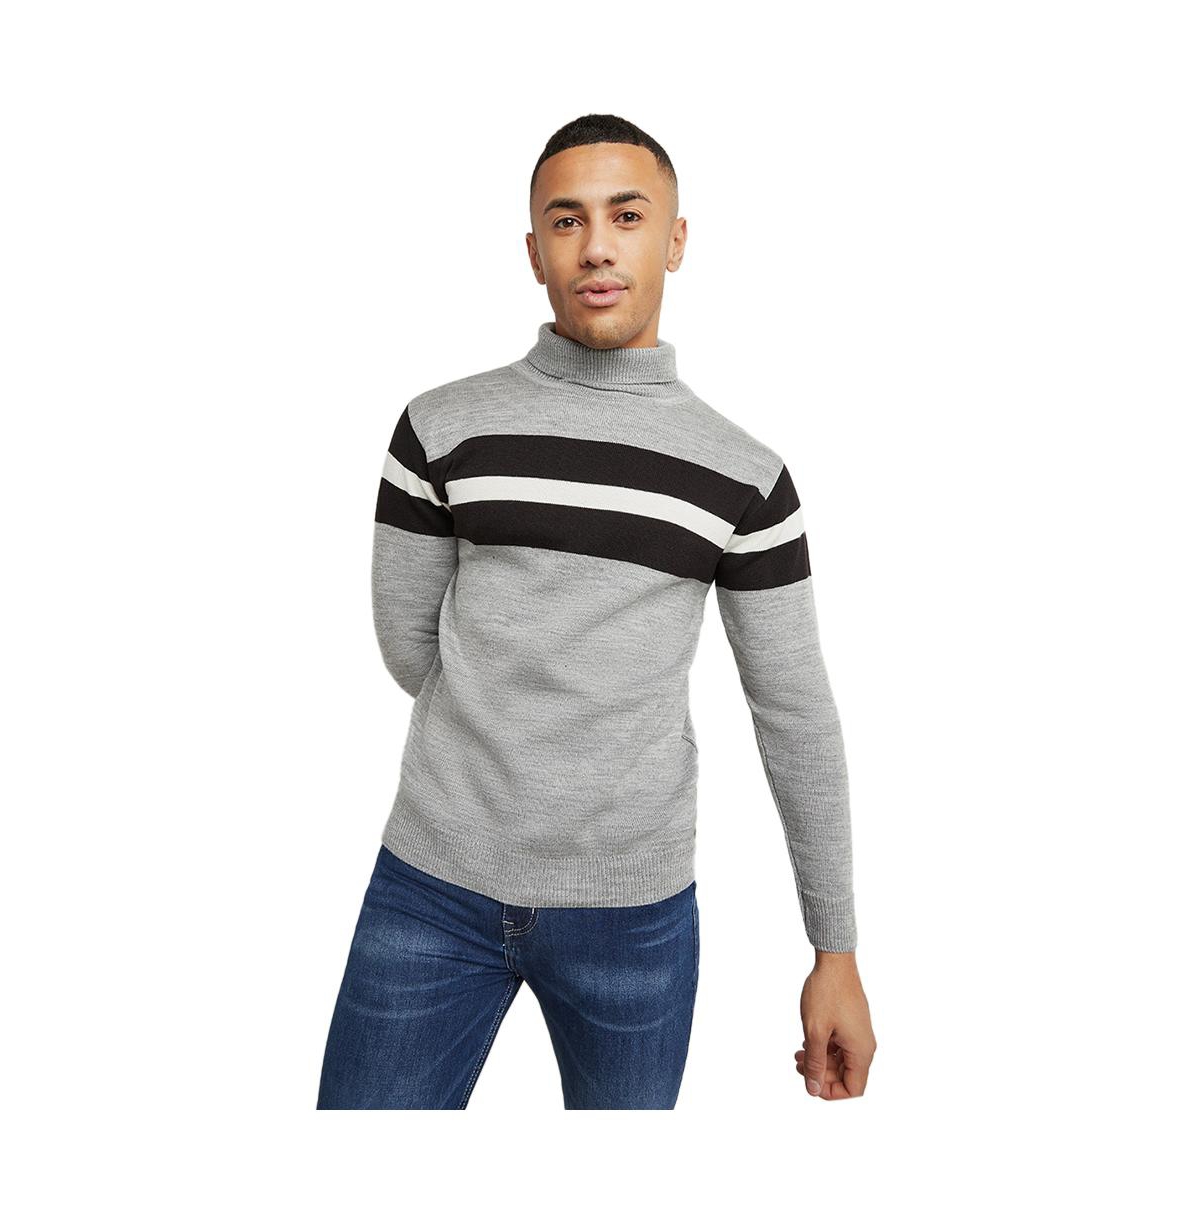 Campus Sutra Men's Light Grey Relaxed Horizontal Striped Pullover Sweater